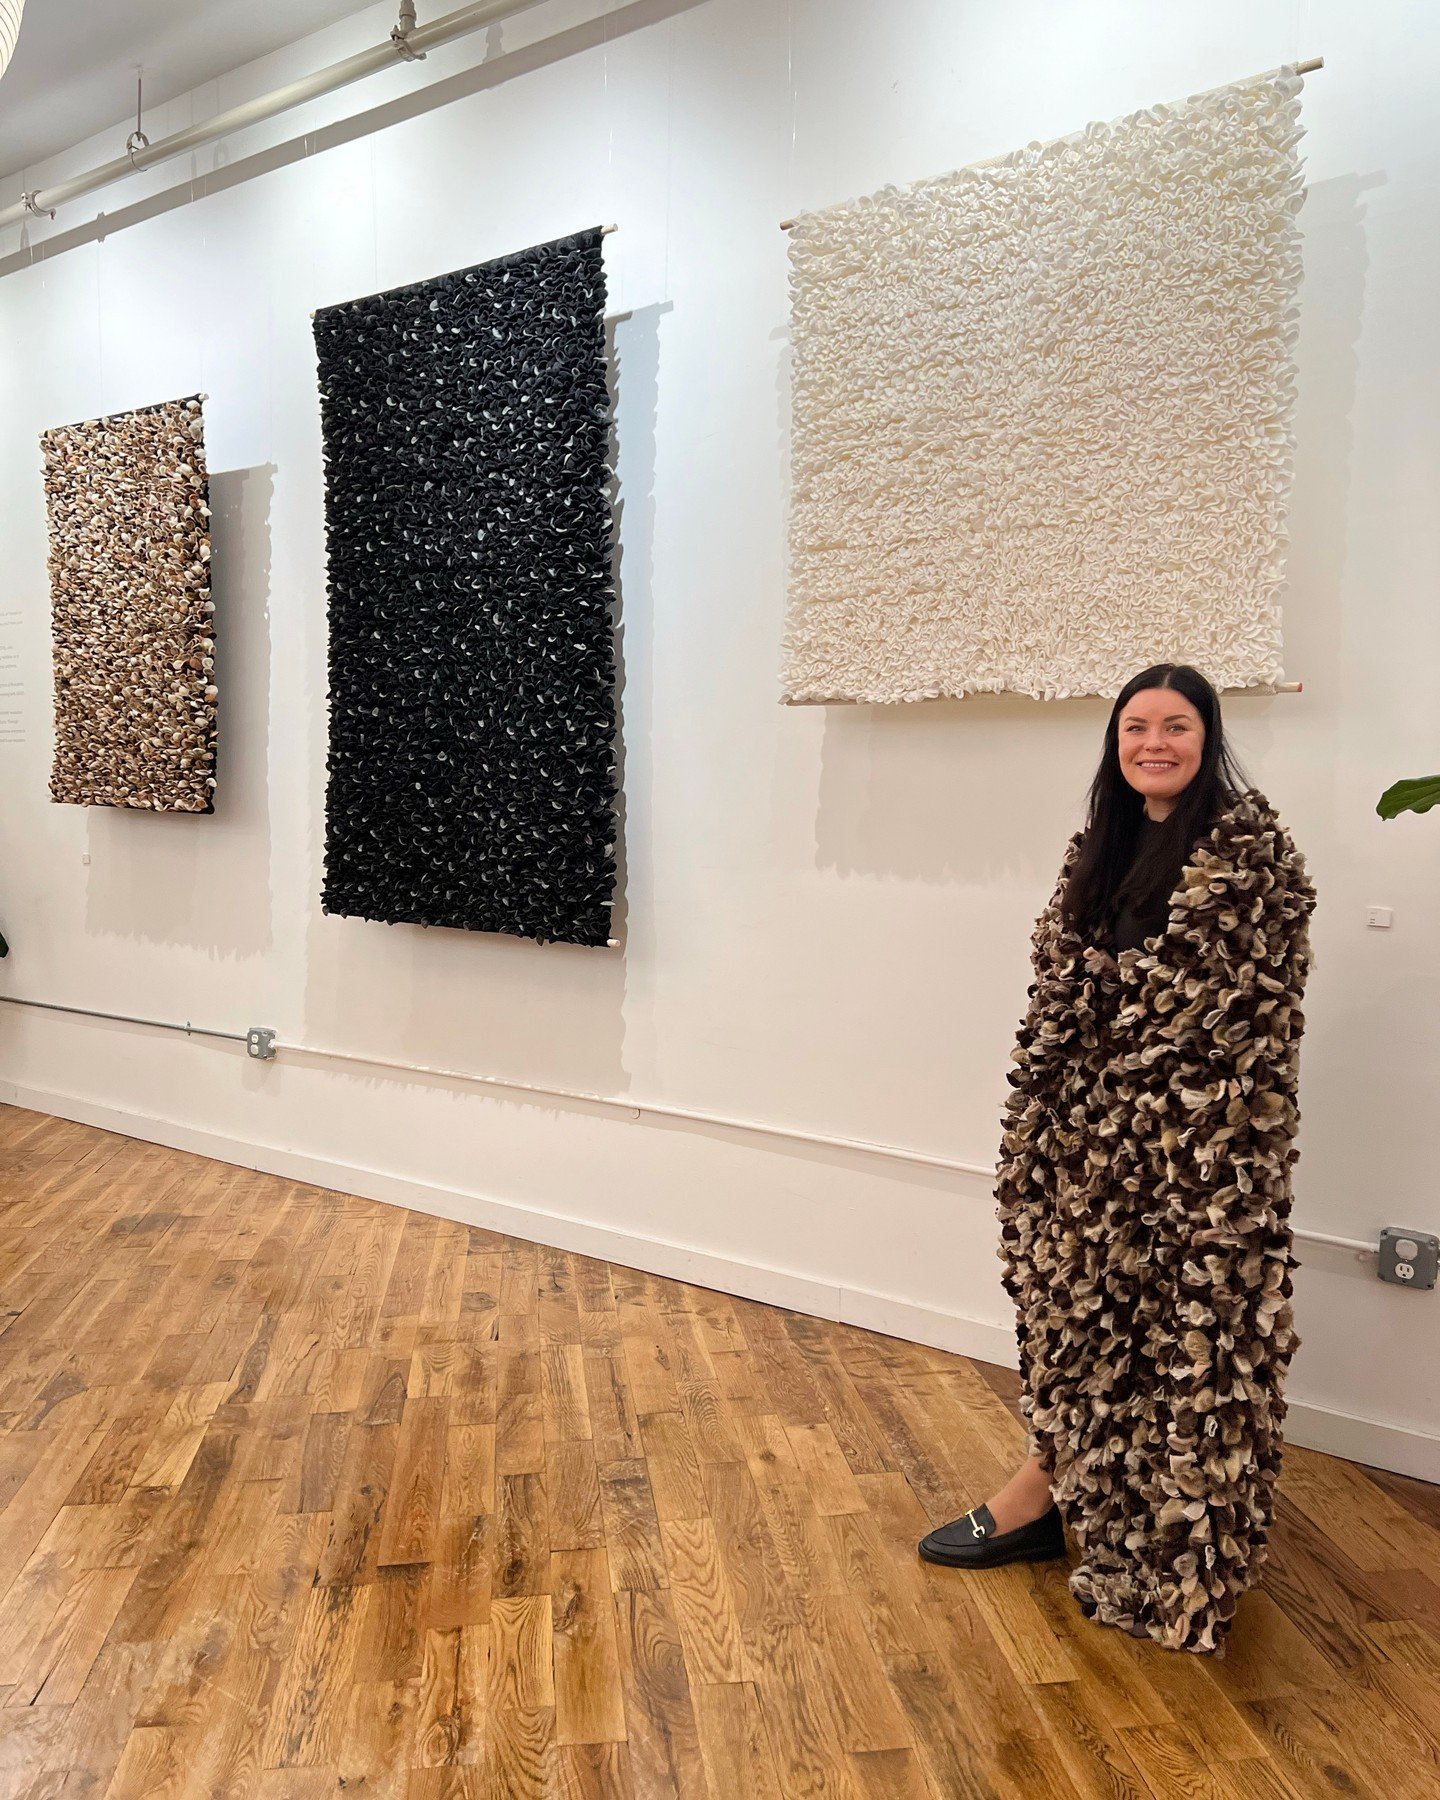 The Woven Wall Art Exhibition from Finland ends this Saturday, April 27th!
🌲 🌲 🌲 🌲 🌲 🌲 
Loop of the Loom - DUMBO is displaying three textile wall arts throughout the month of Earth Day. Her original woven works brought the concept of &quot;森林浴 